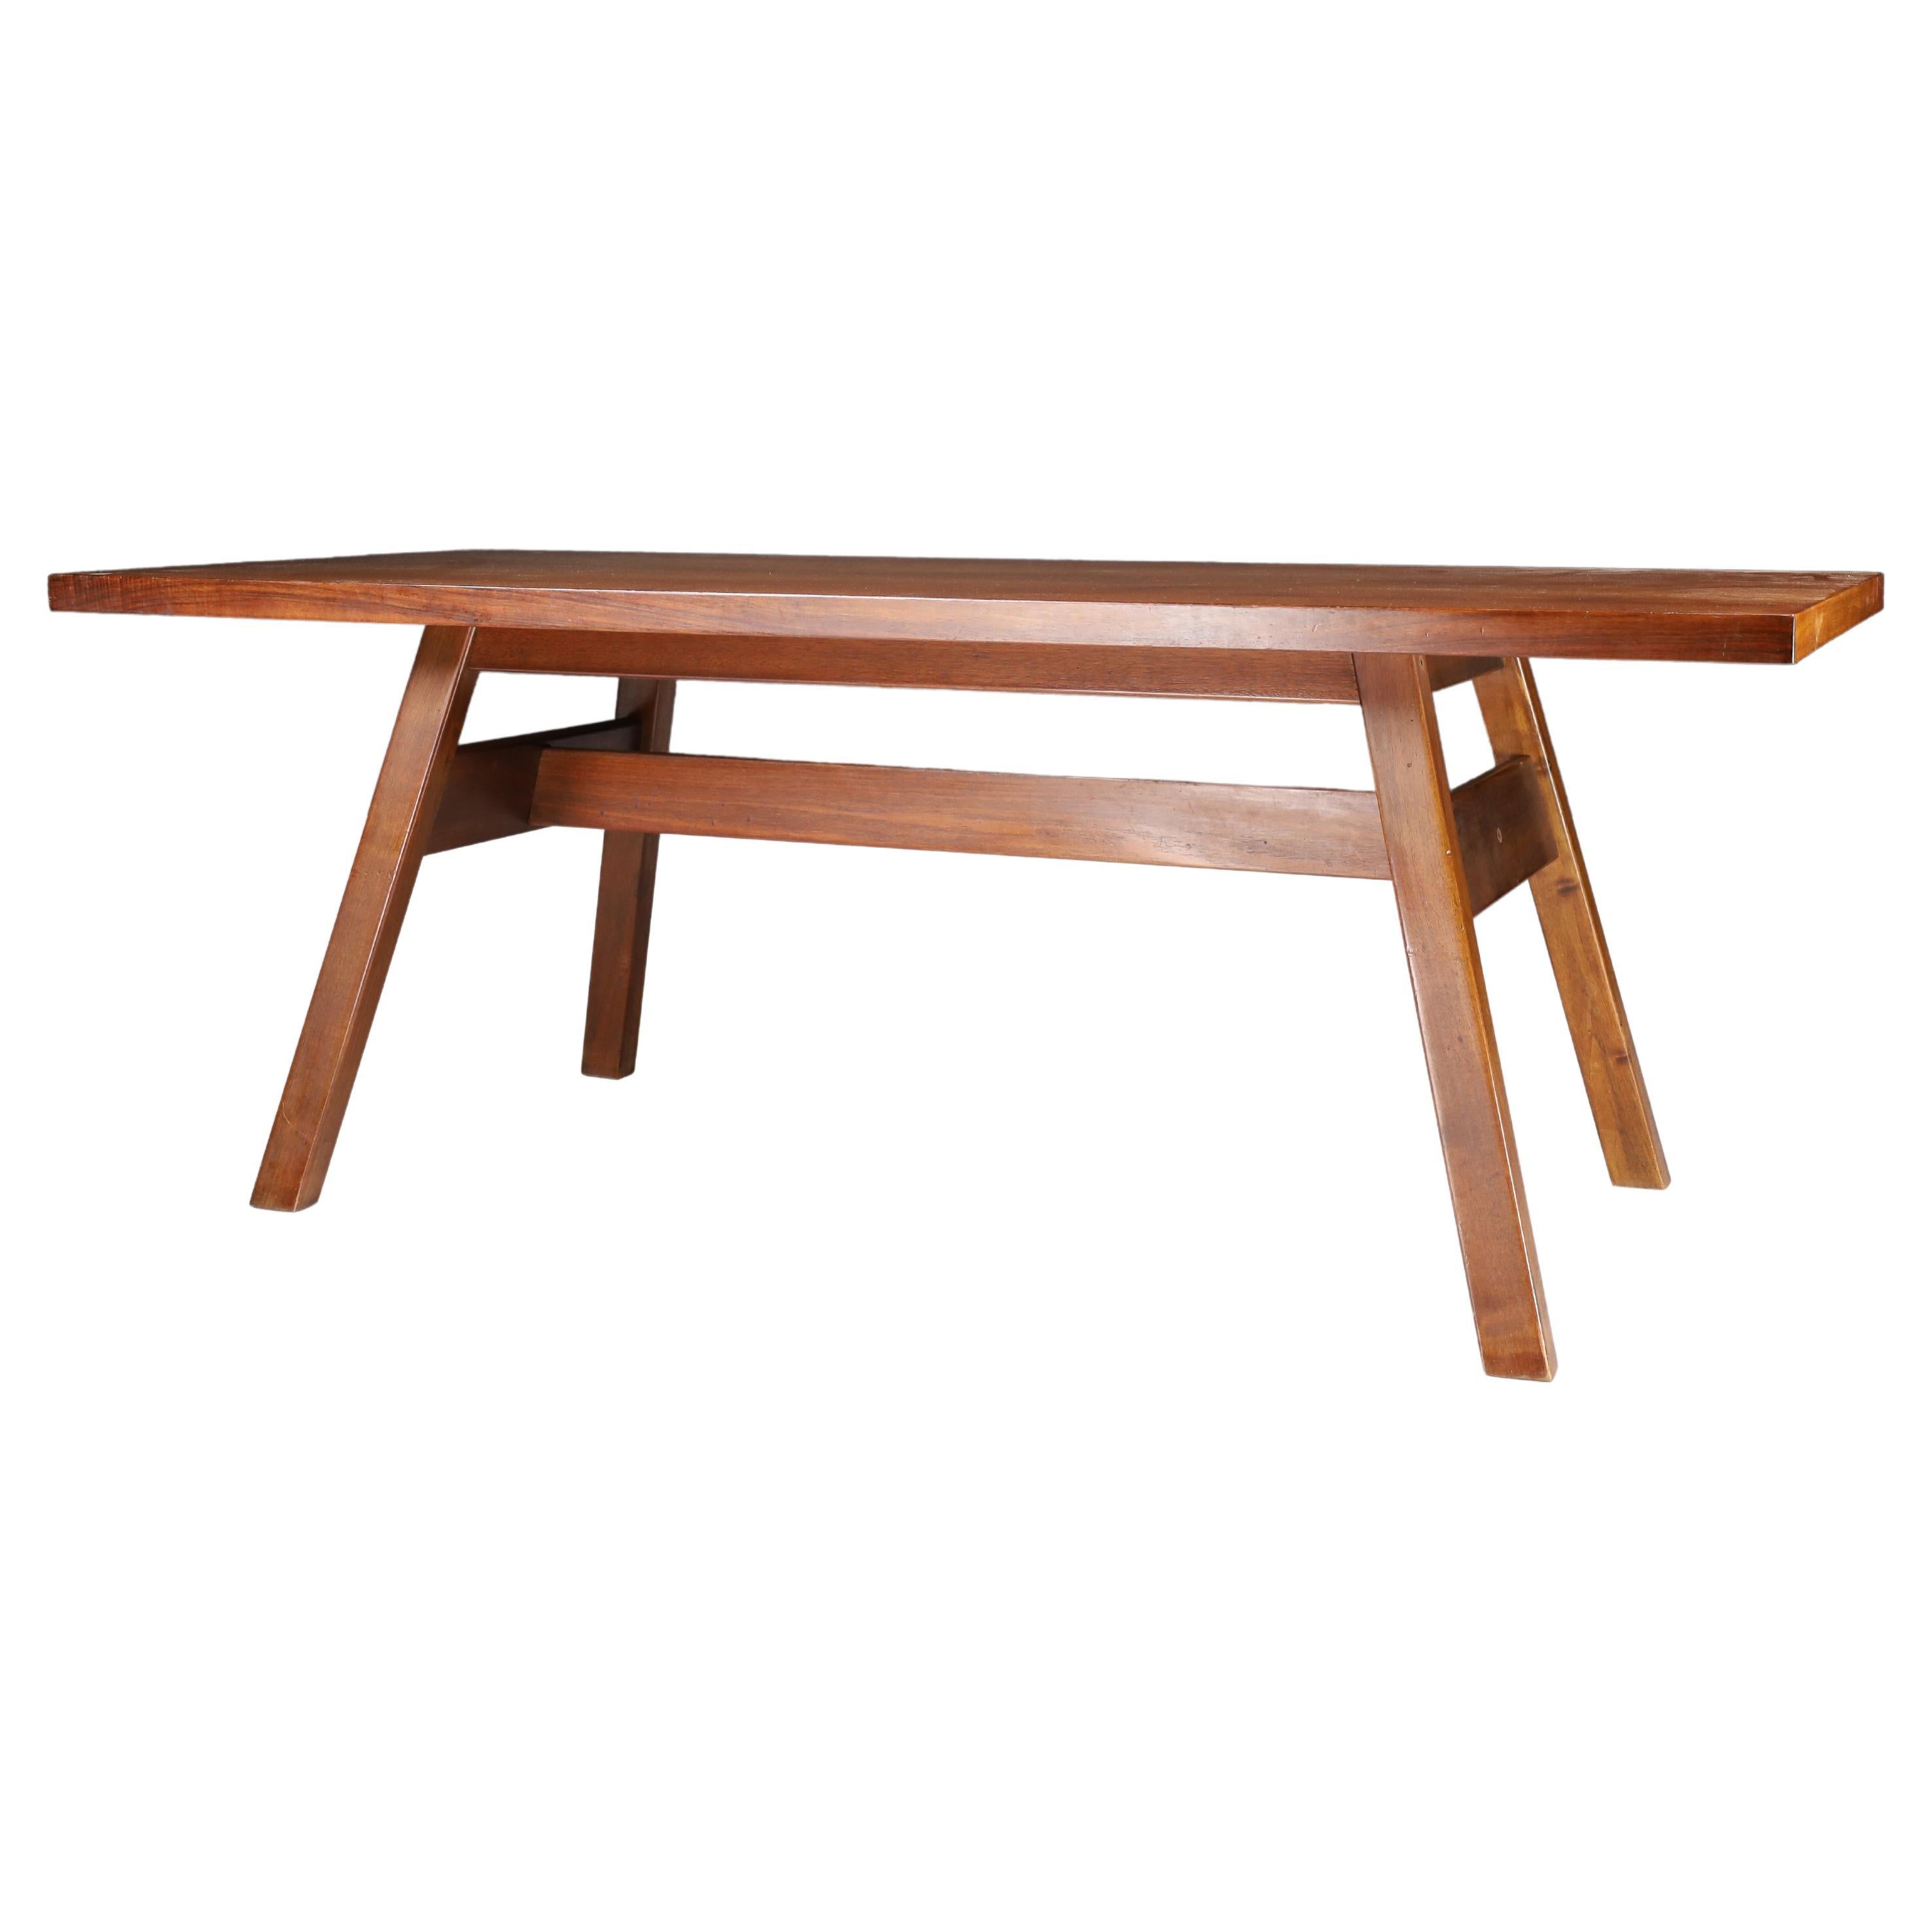 Giovanni Michelucci Walnut Dining Room Table for Poltronova, Italy, 1964  For Sale